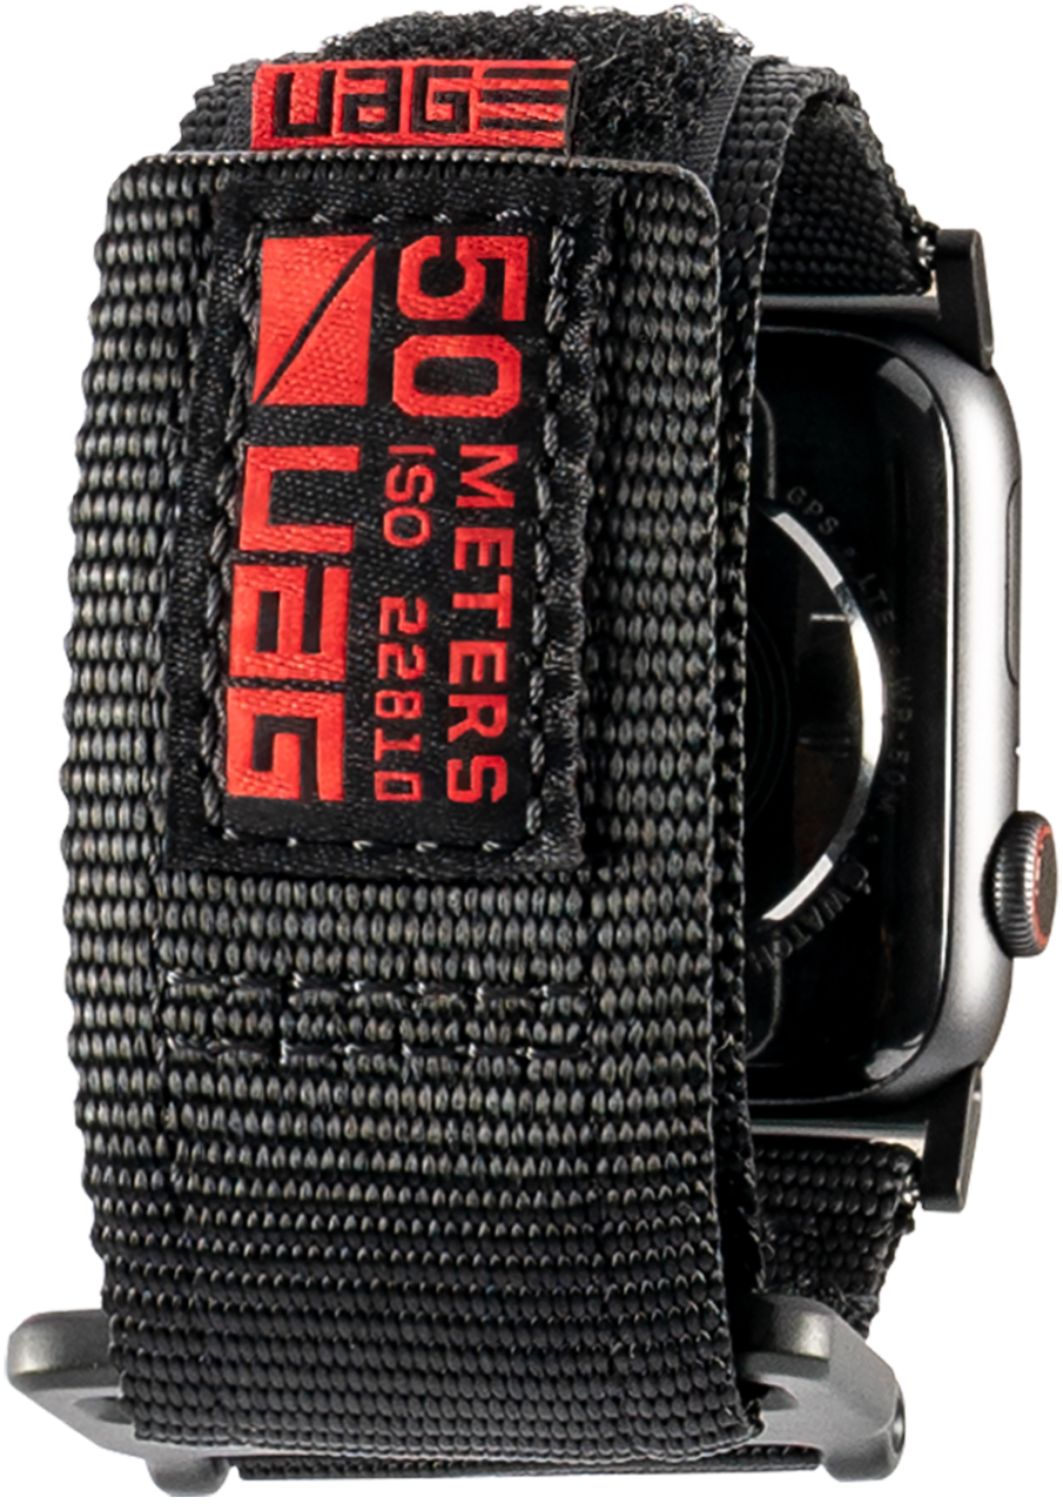 UAG Dot Silicone Watch Band for Apple Watch 38mm and  - Best Buy